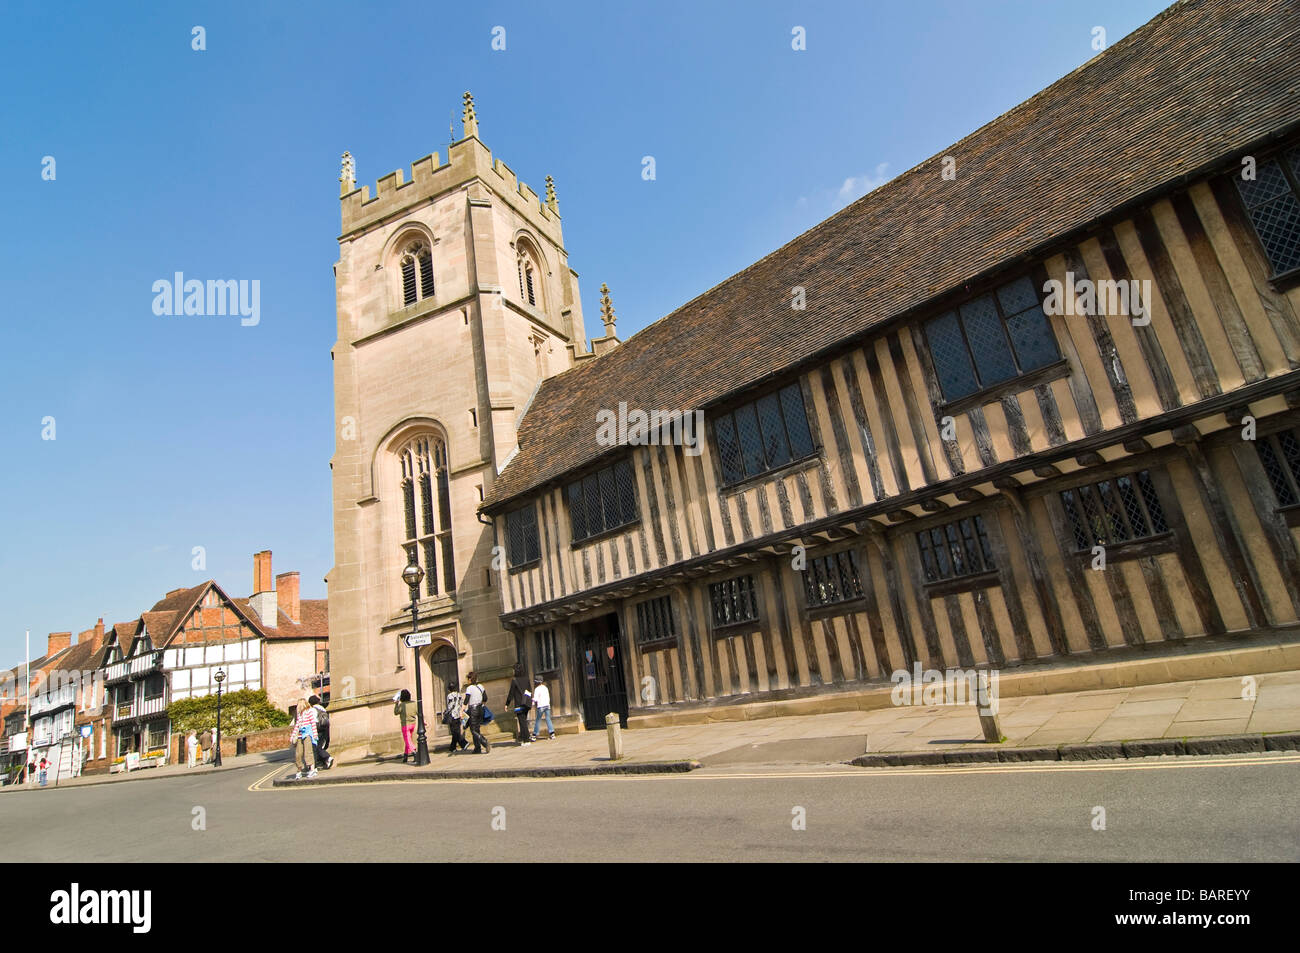 Horizontal wide angle of the old Tudor Almshouses Guild Chapel and Nash's House on Church Street on a bright sunny day Stock Photo